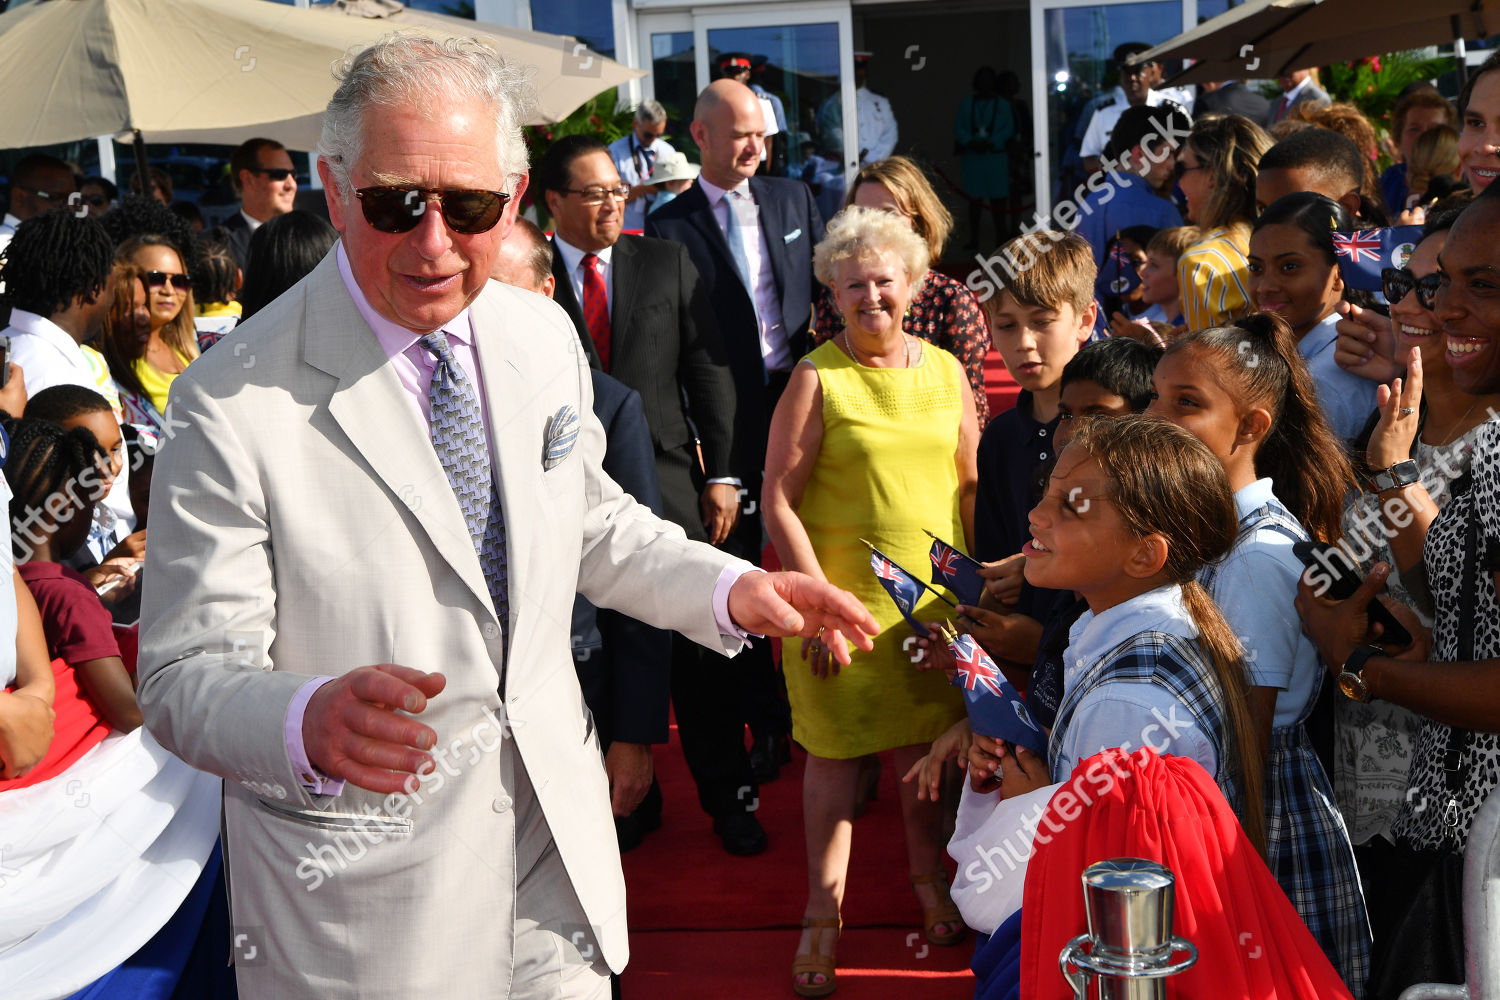 prince-charles-and-camilla-duchess-of-cornwall-caribbean-tour-cayman-islands-shutterstock-editorial-10180229t.jpg